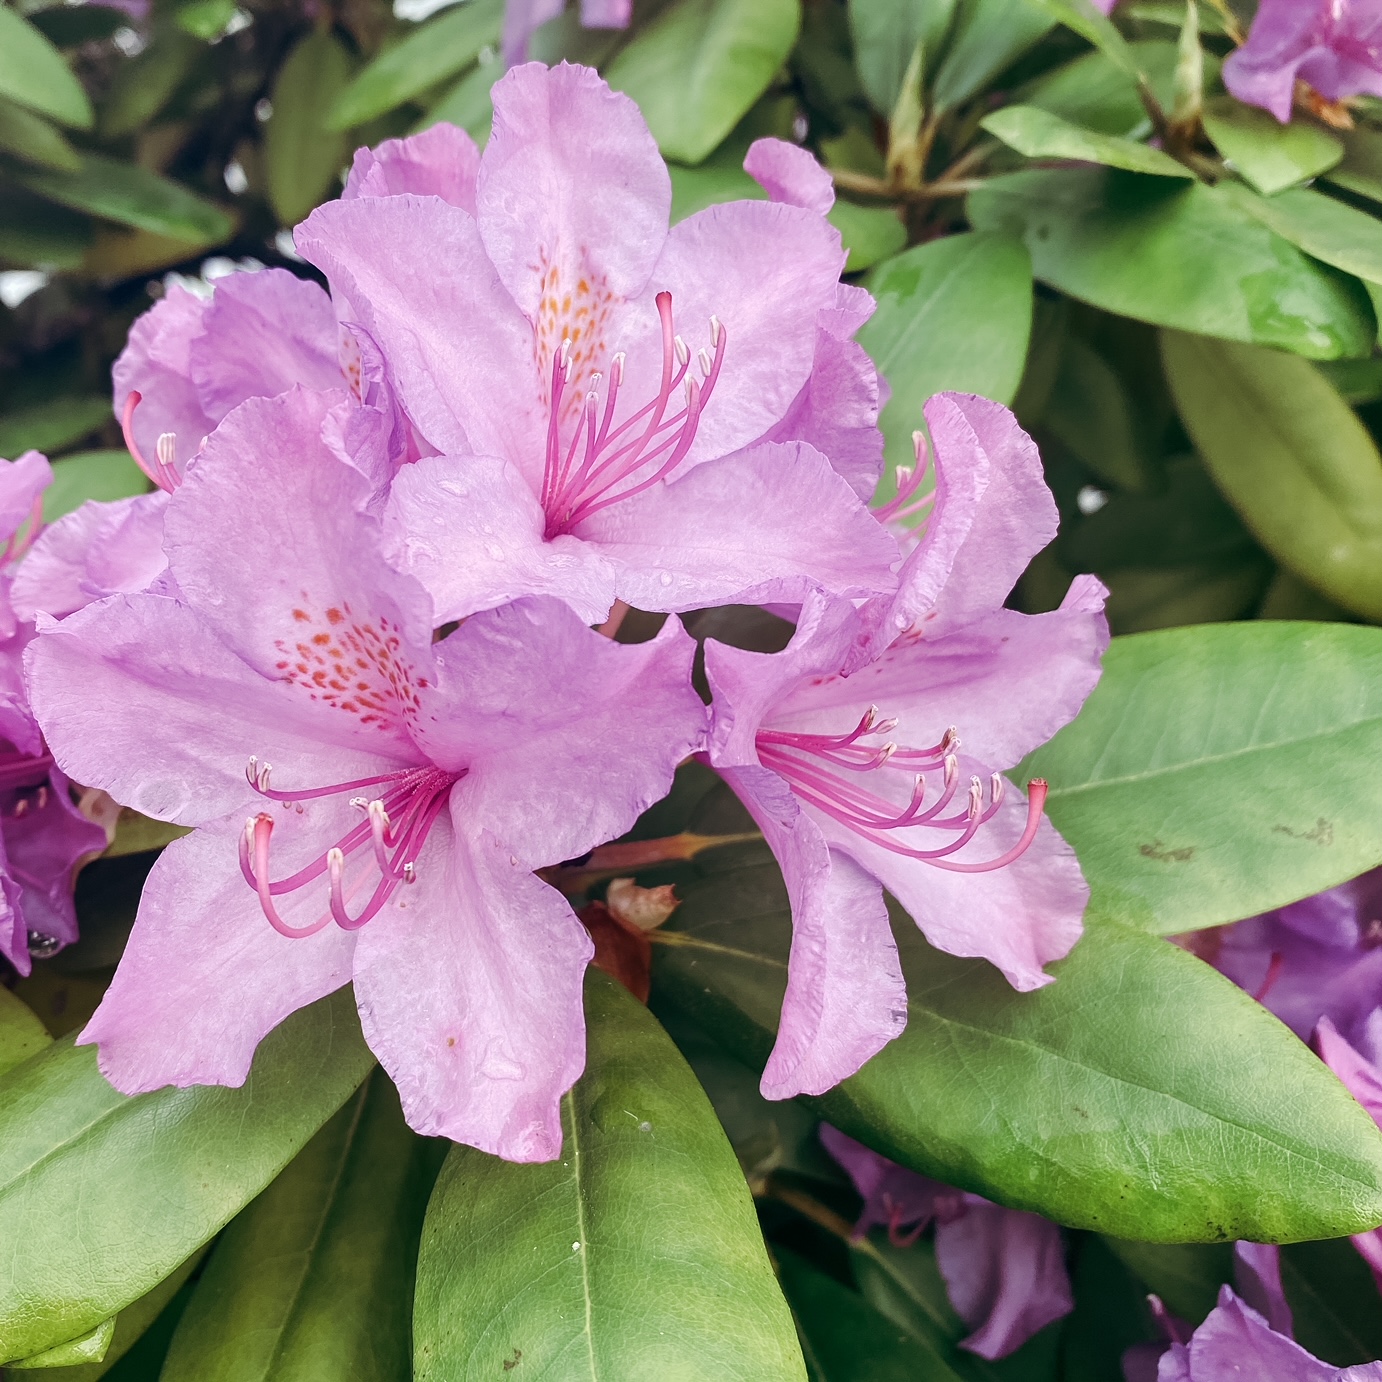 Moi j'aime les rhododendrons